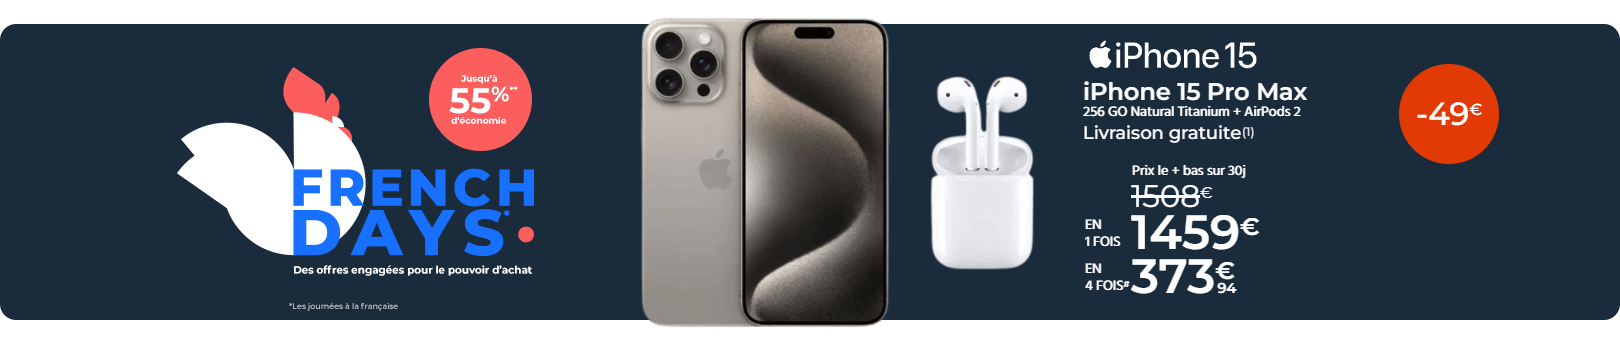 Iphone 15 + airpods 2 